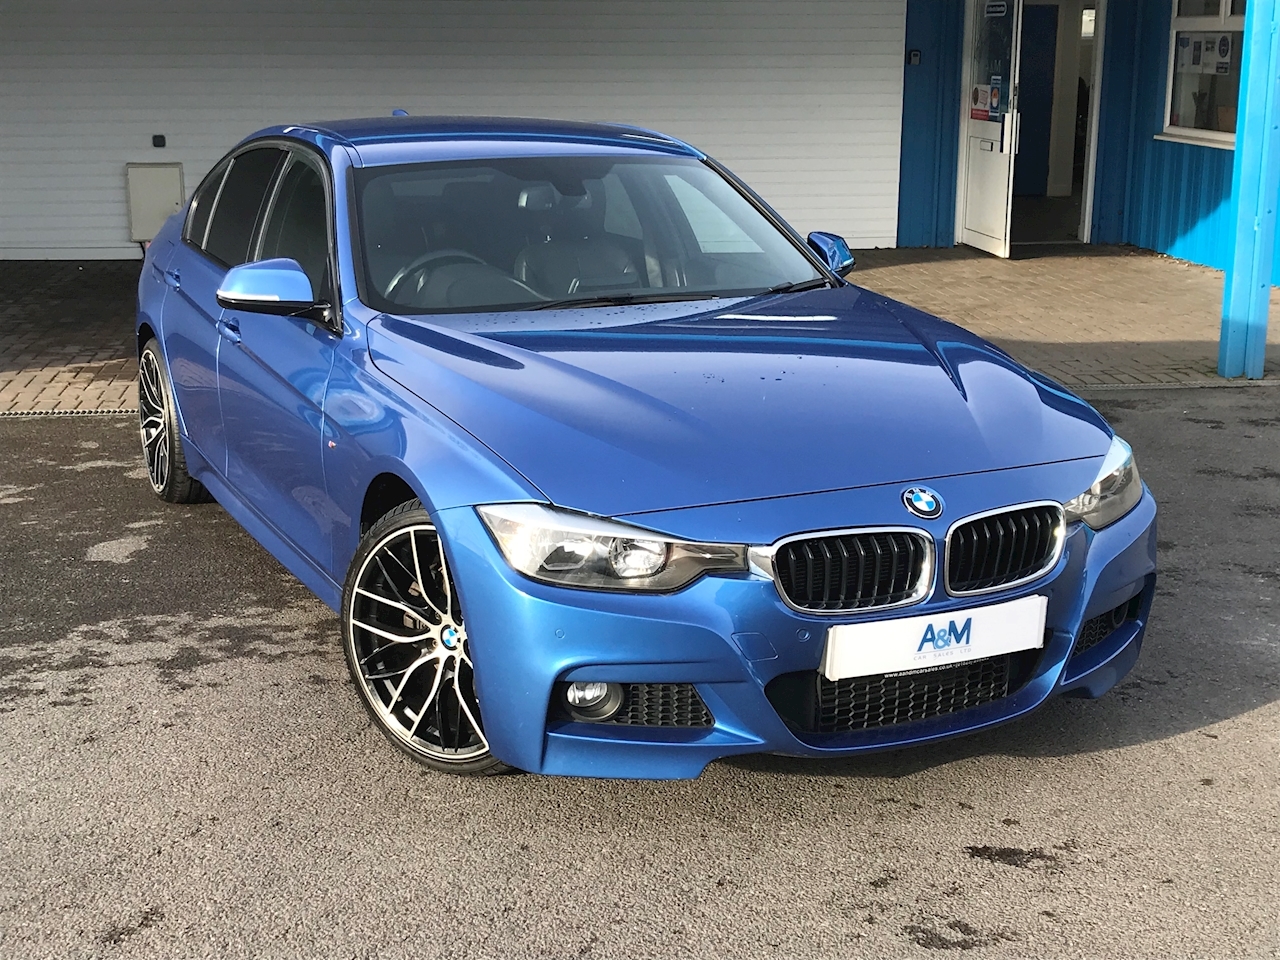 Used 2014 BMW 3 Series 330d M Sport Saloon For Sale U15489110 A amp M 